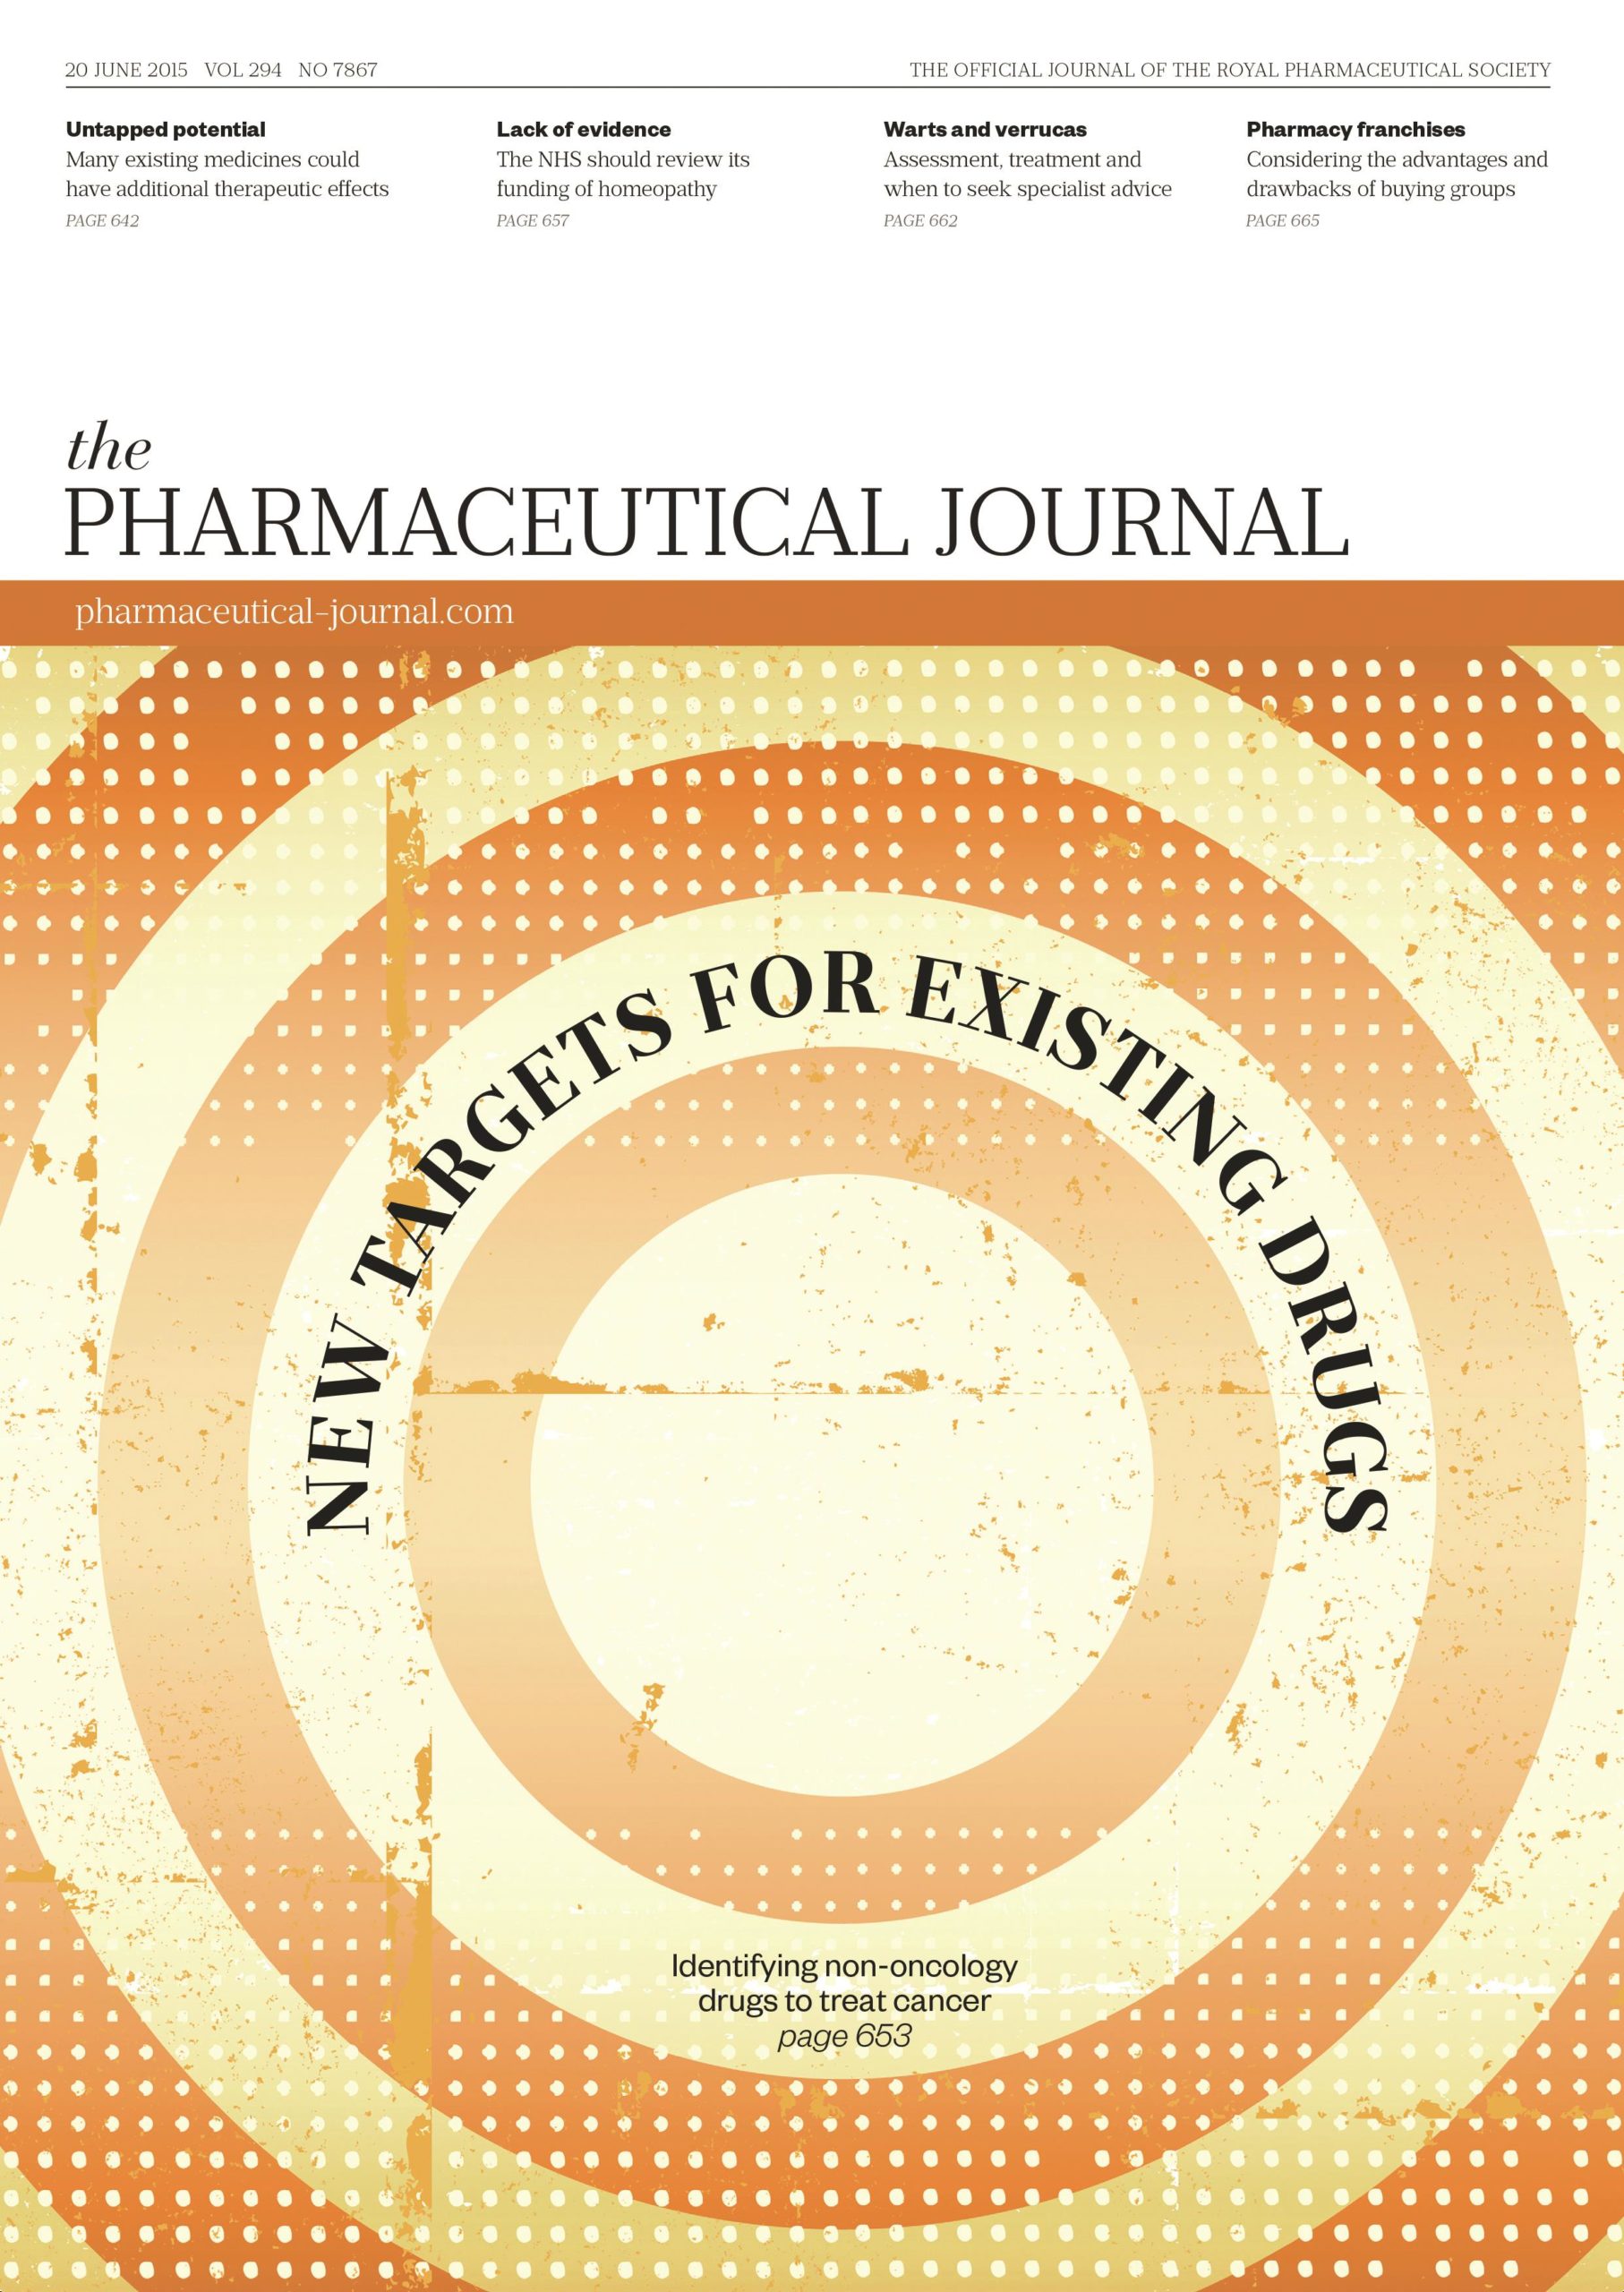 Publication issue cover for PJ, 20 June 2015, Vol 294, No 7867